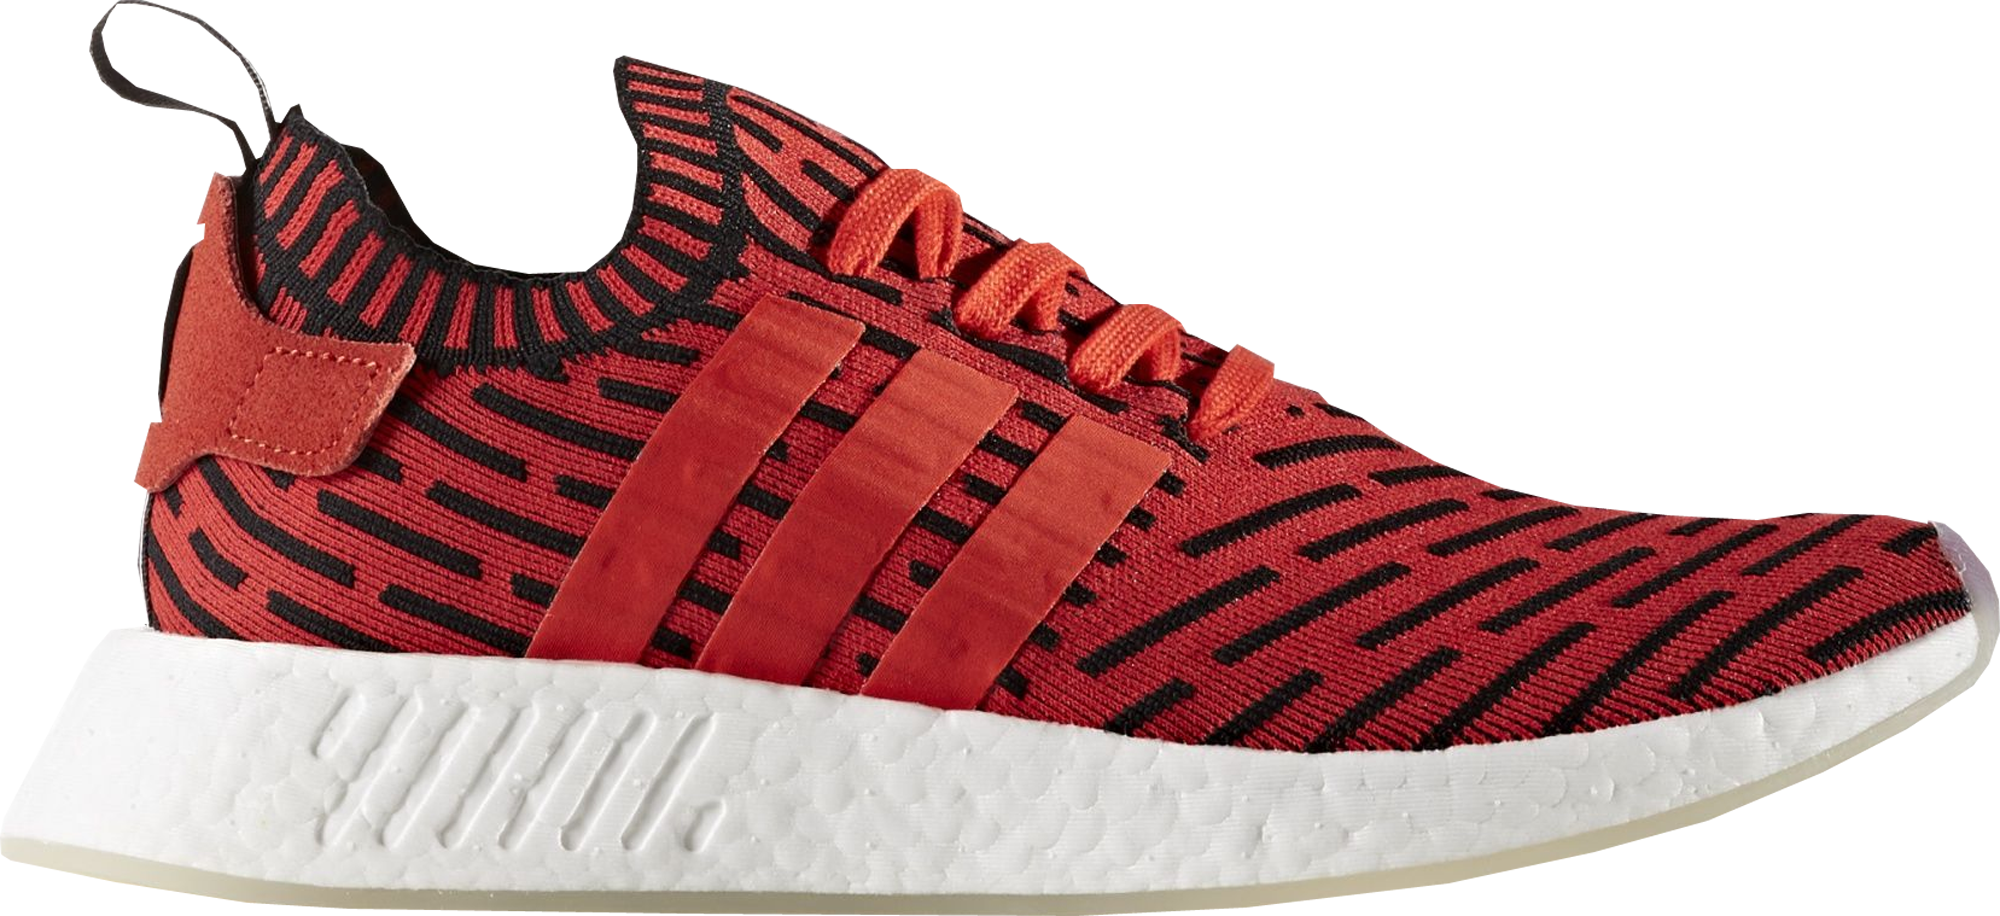 adidas NMD R2 Core Red - BB2910